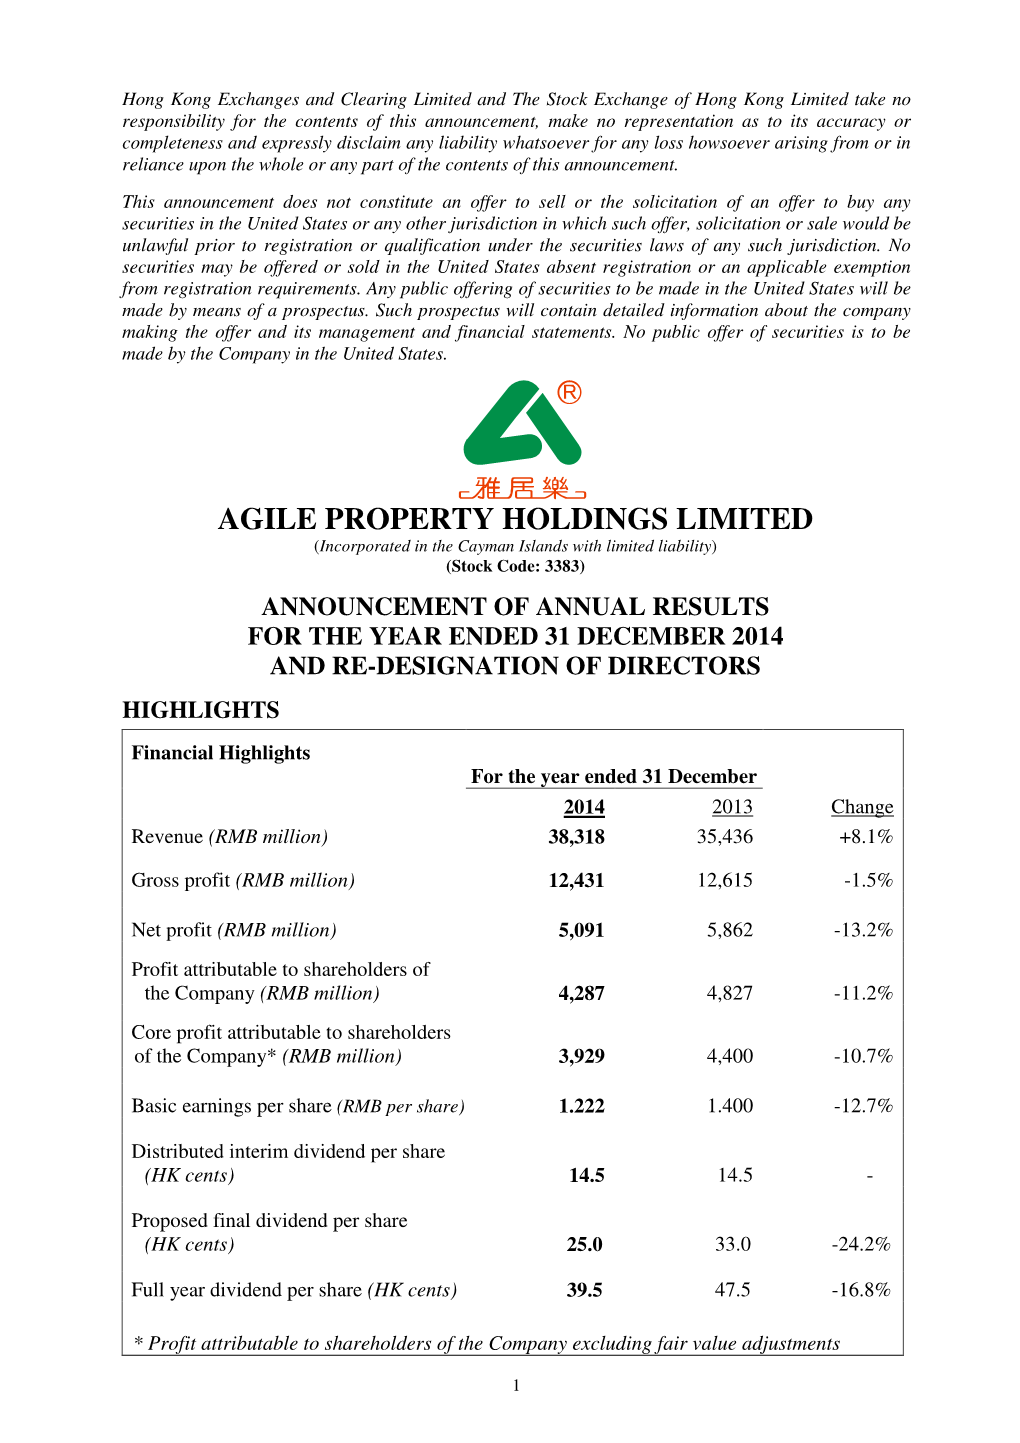 AGILE PROPERTY HOLDINGS LIMITED (Incorporated in the Cayman Islands with Limited Liability ) (Stock Code: 3383)